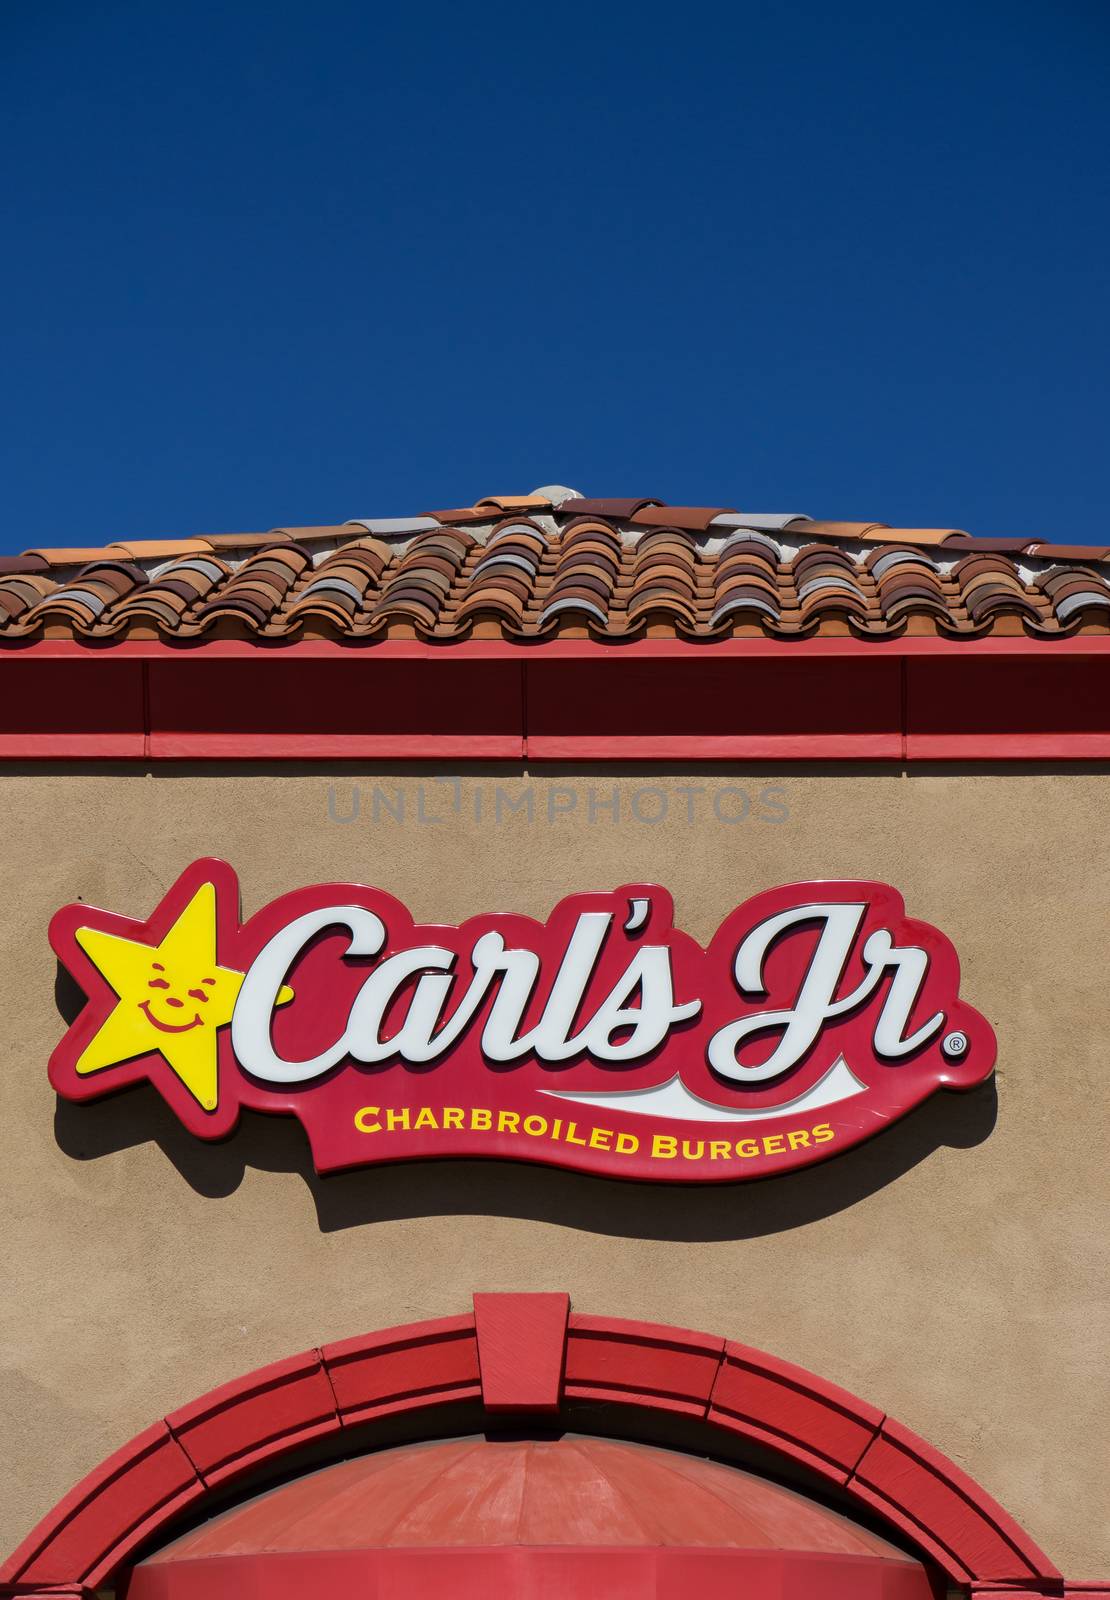 GRANADA HILLS,CA/USA - OCTOBER 30, 2015: Carl's Jr. Restaurant exterior. Carl's Jr., an American-based fast-food restaurant chain with locations in the Western and Southwestern states.